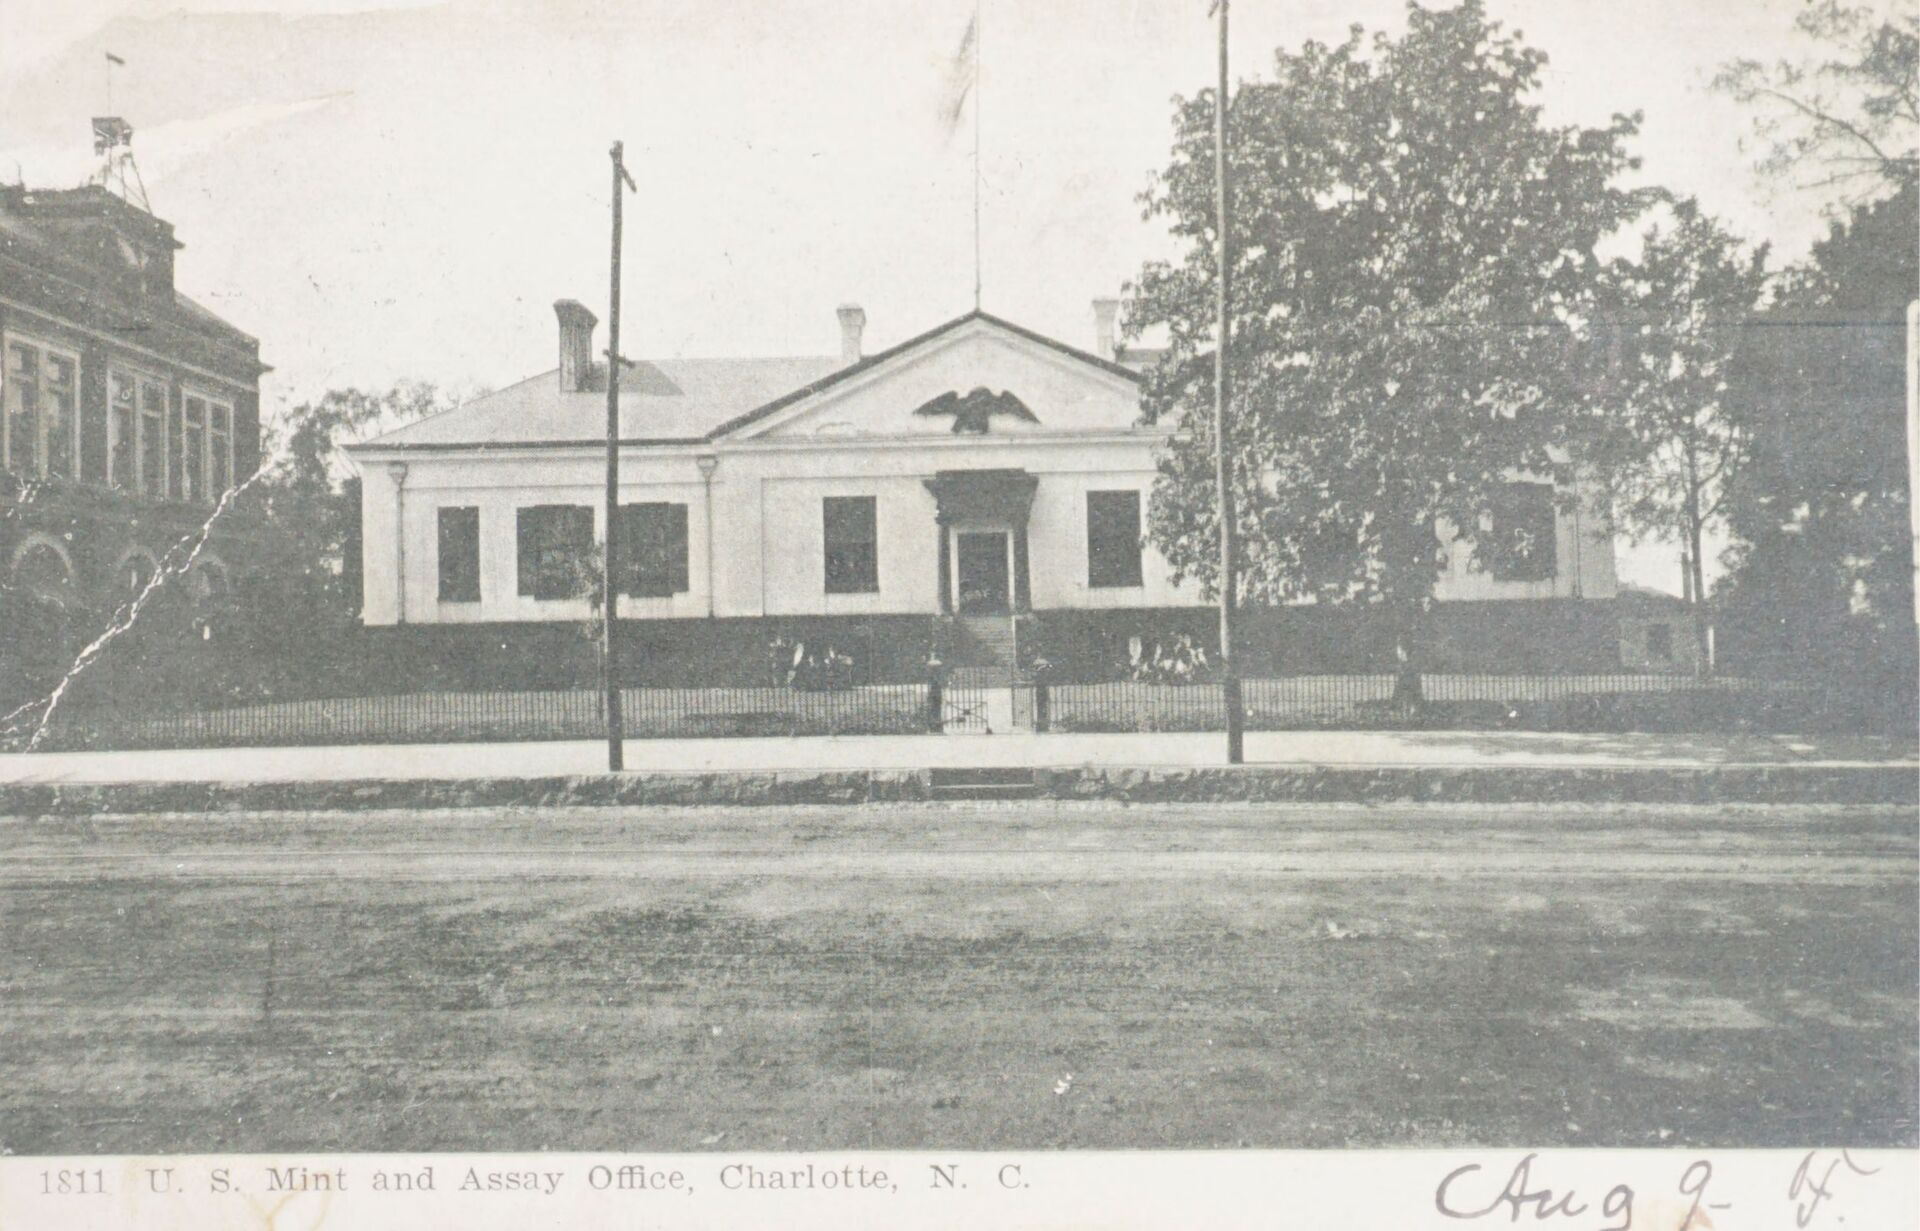 Postcard from 1907 of the Charlotte Mint